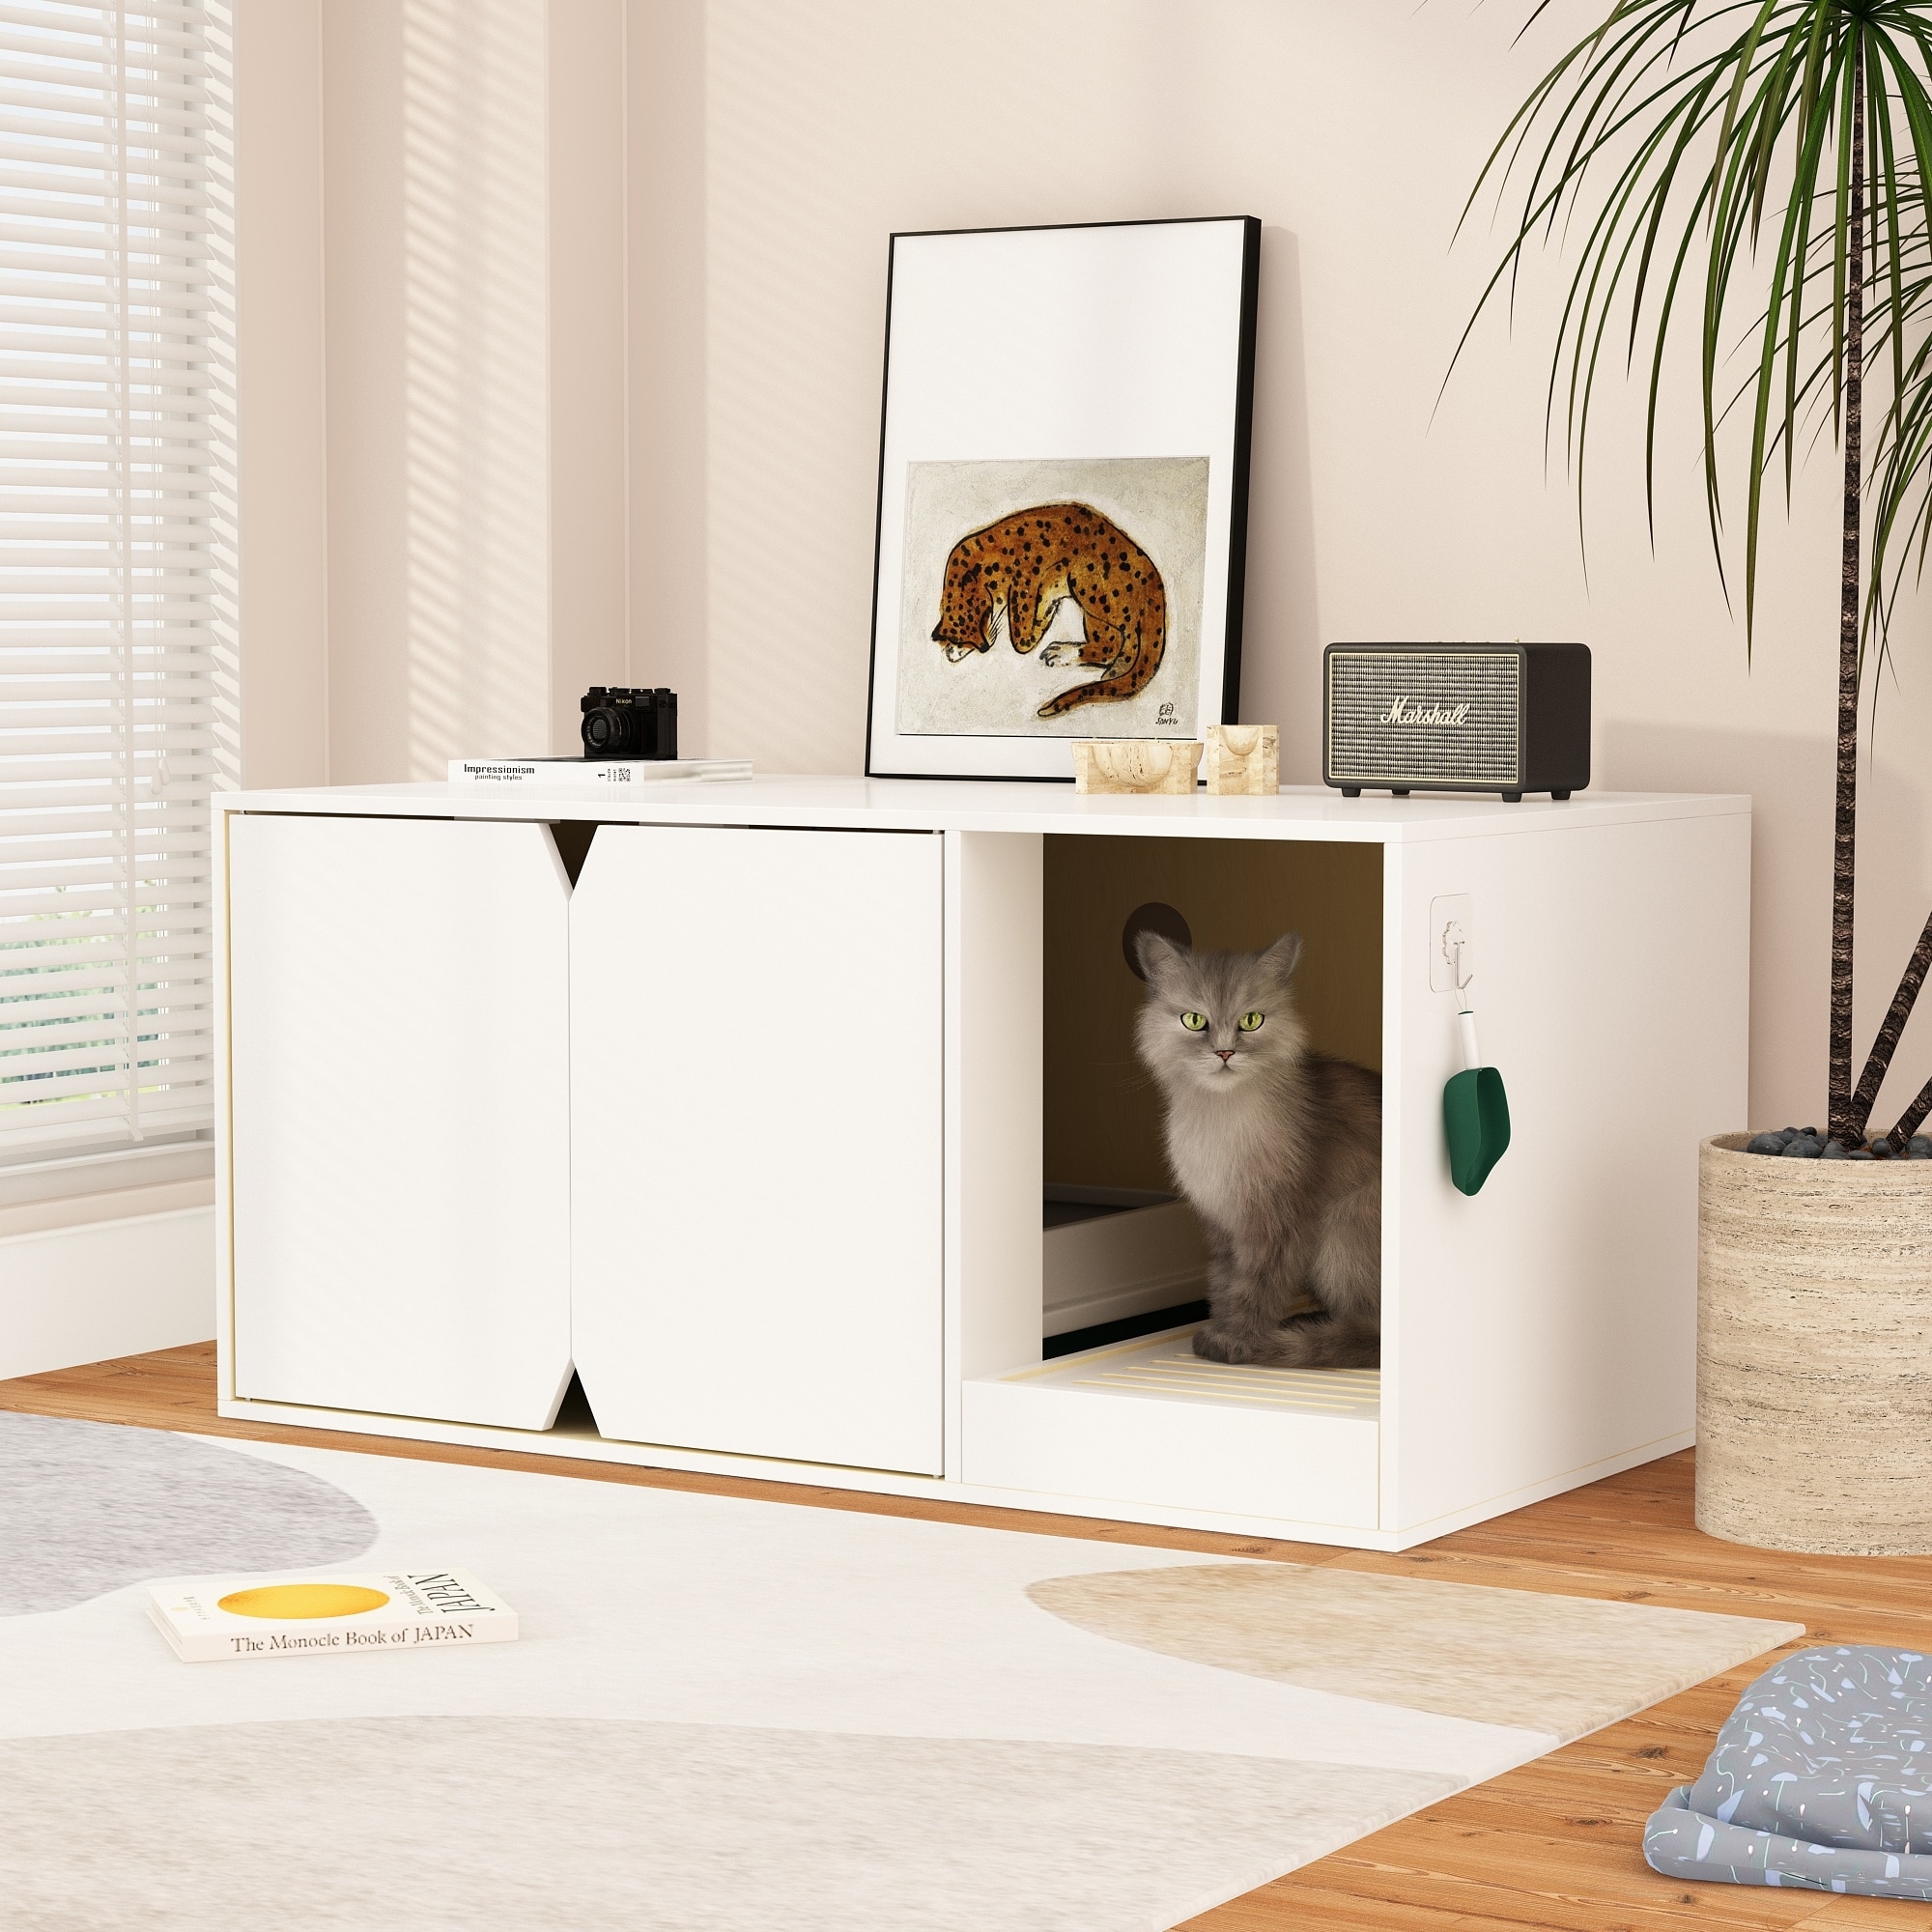 https://ak1.ostkcdn.com/images/products/is/images/direct/c1e4515db8c51506c3435b58fbfe74b7b2075e57/Decorative-Furniture-with-Hidden-Cat-Litter-Space-%26-Litter-Catcher.jpg